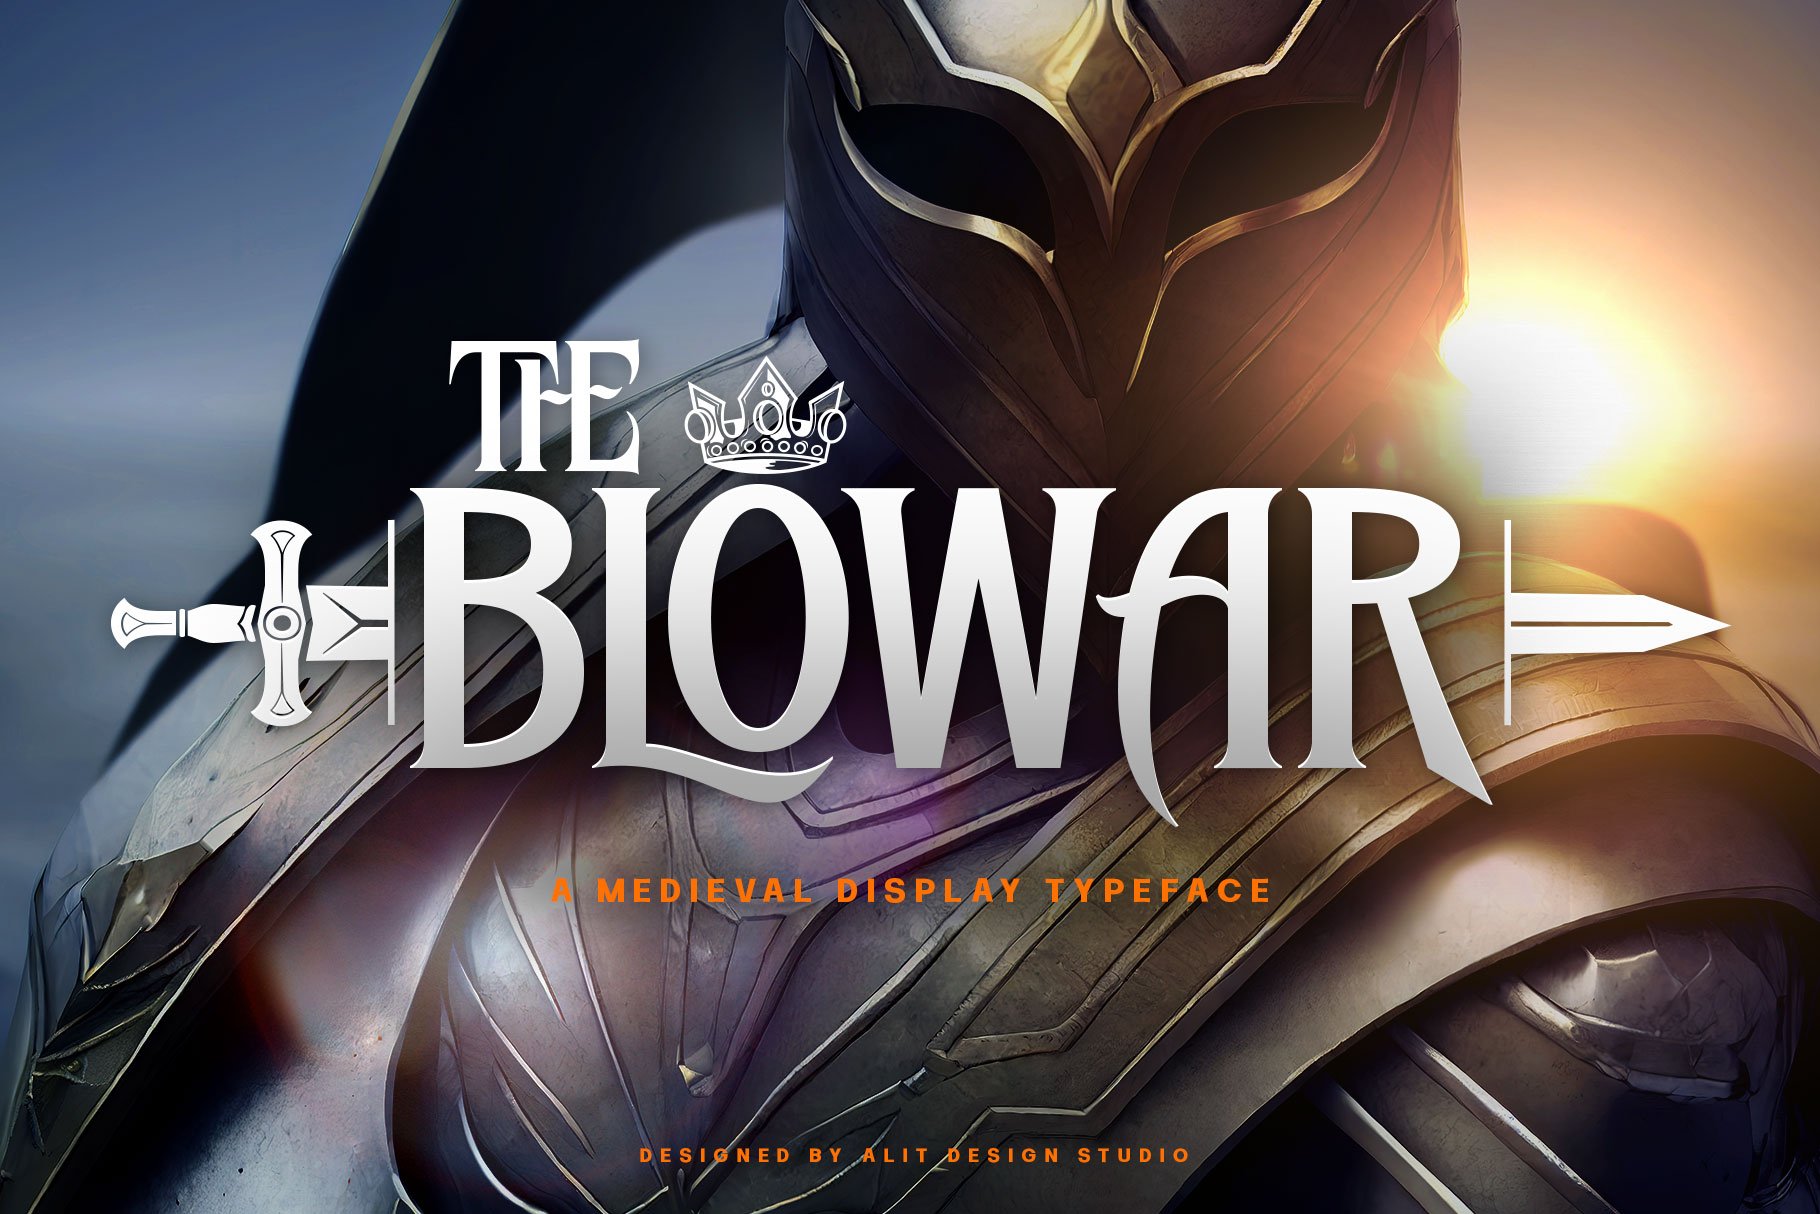 The Blowar Typeface cover image.